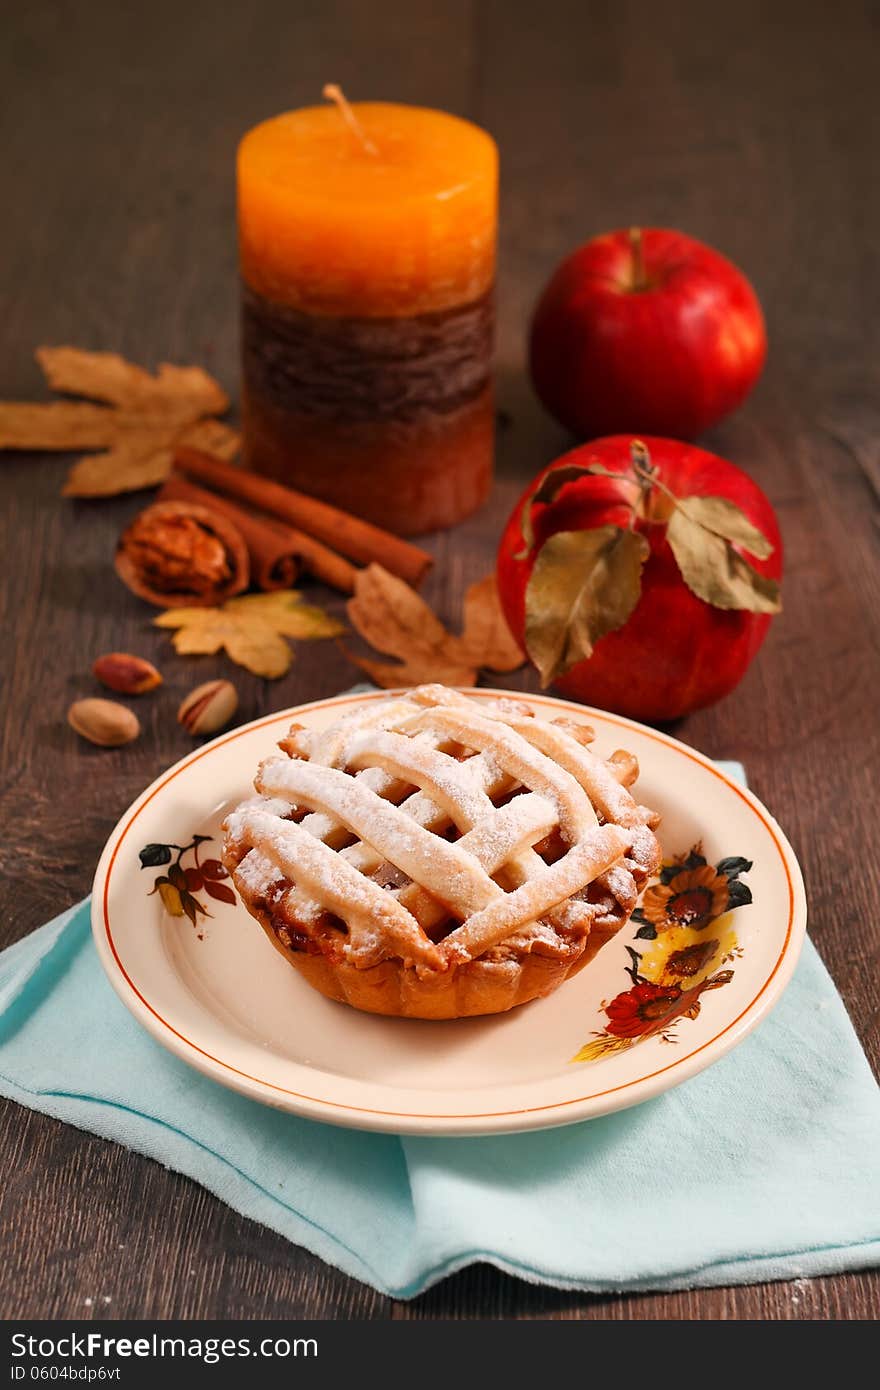 Small apple pie on wooden table